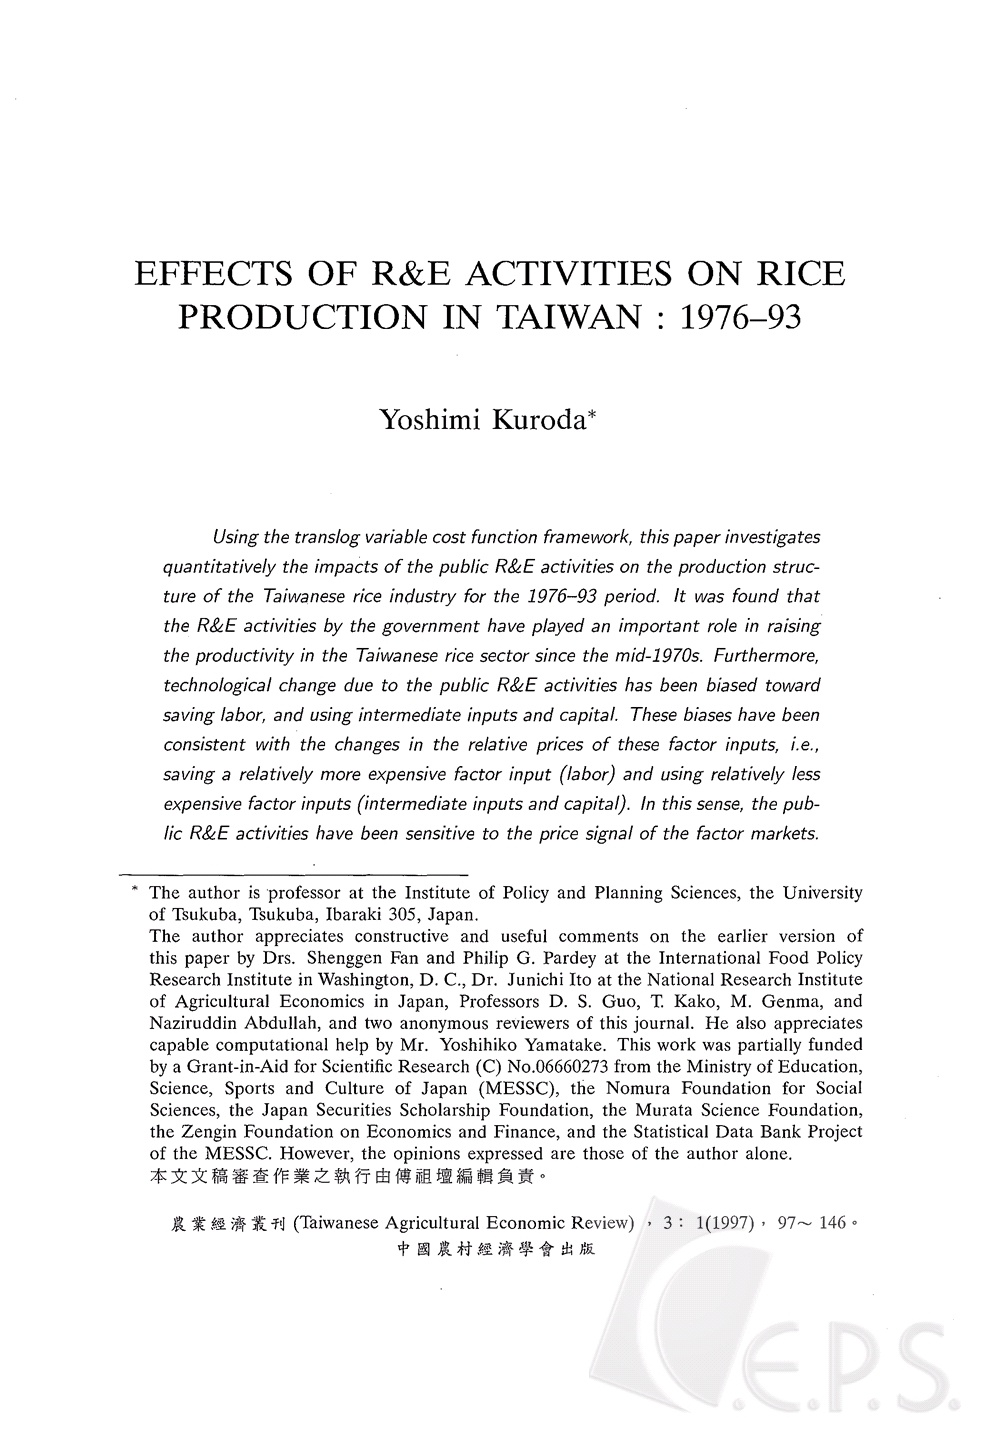 Effects_of_R_E_Activities_on_Rice_Production_on_Taiwan.jpg